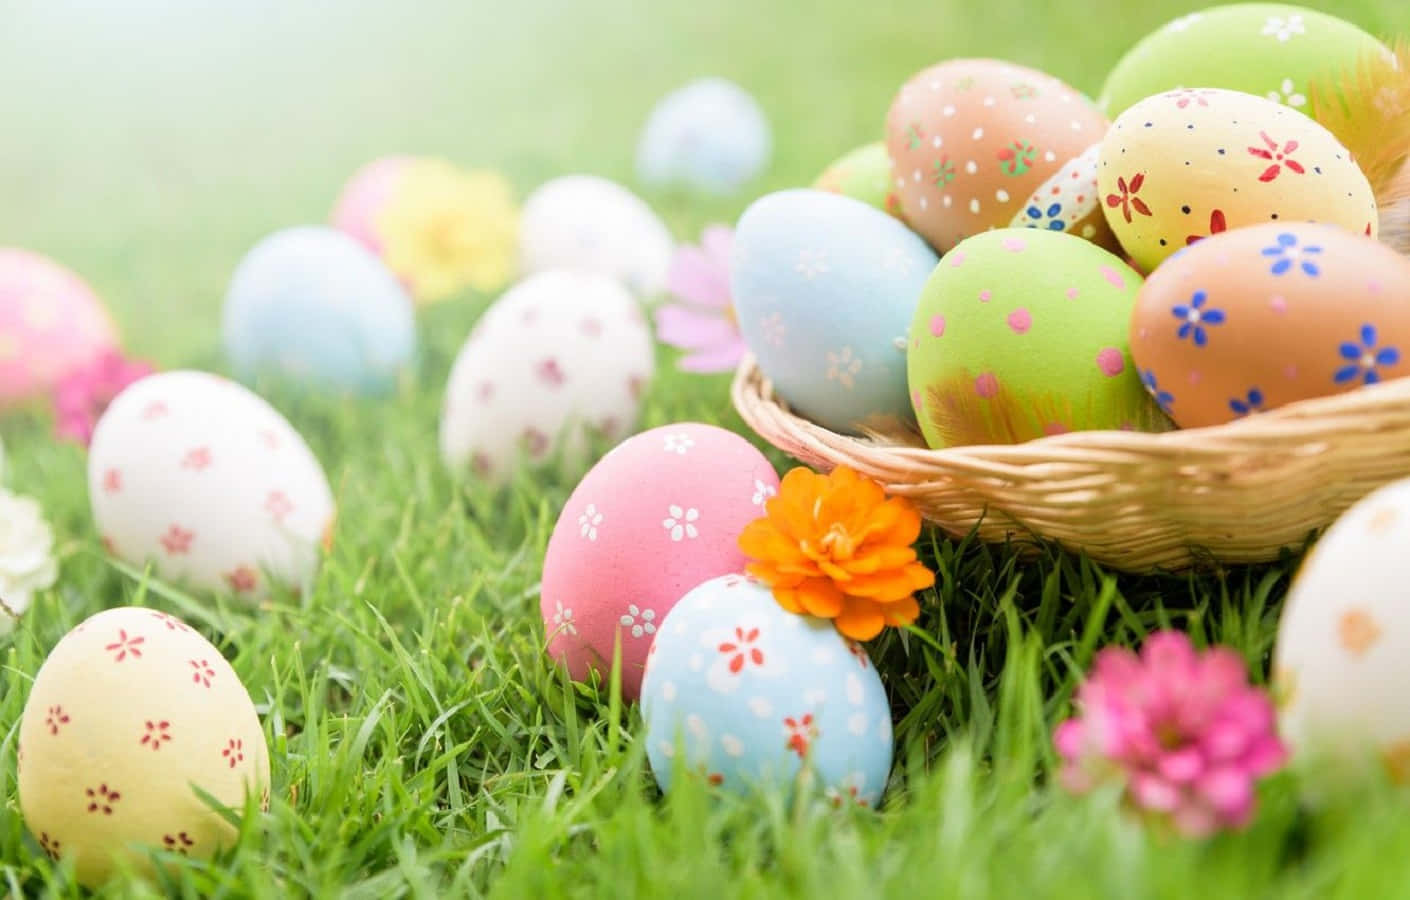 Celebrate the beauty of Easter with a pastel themed background.